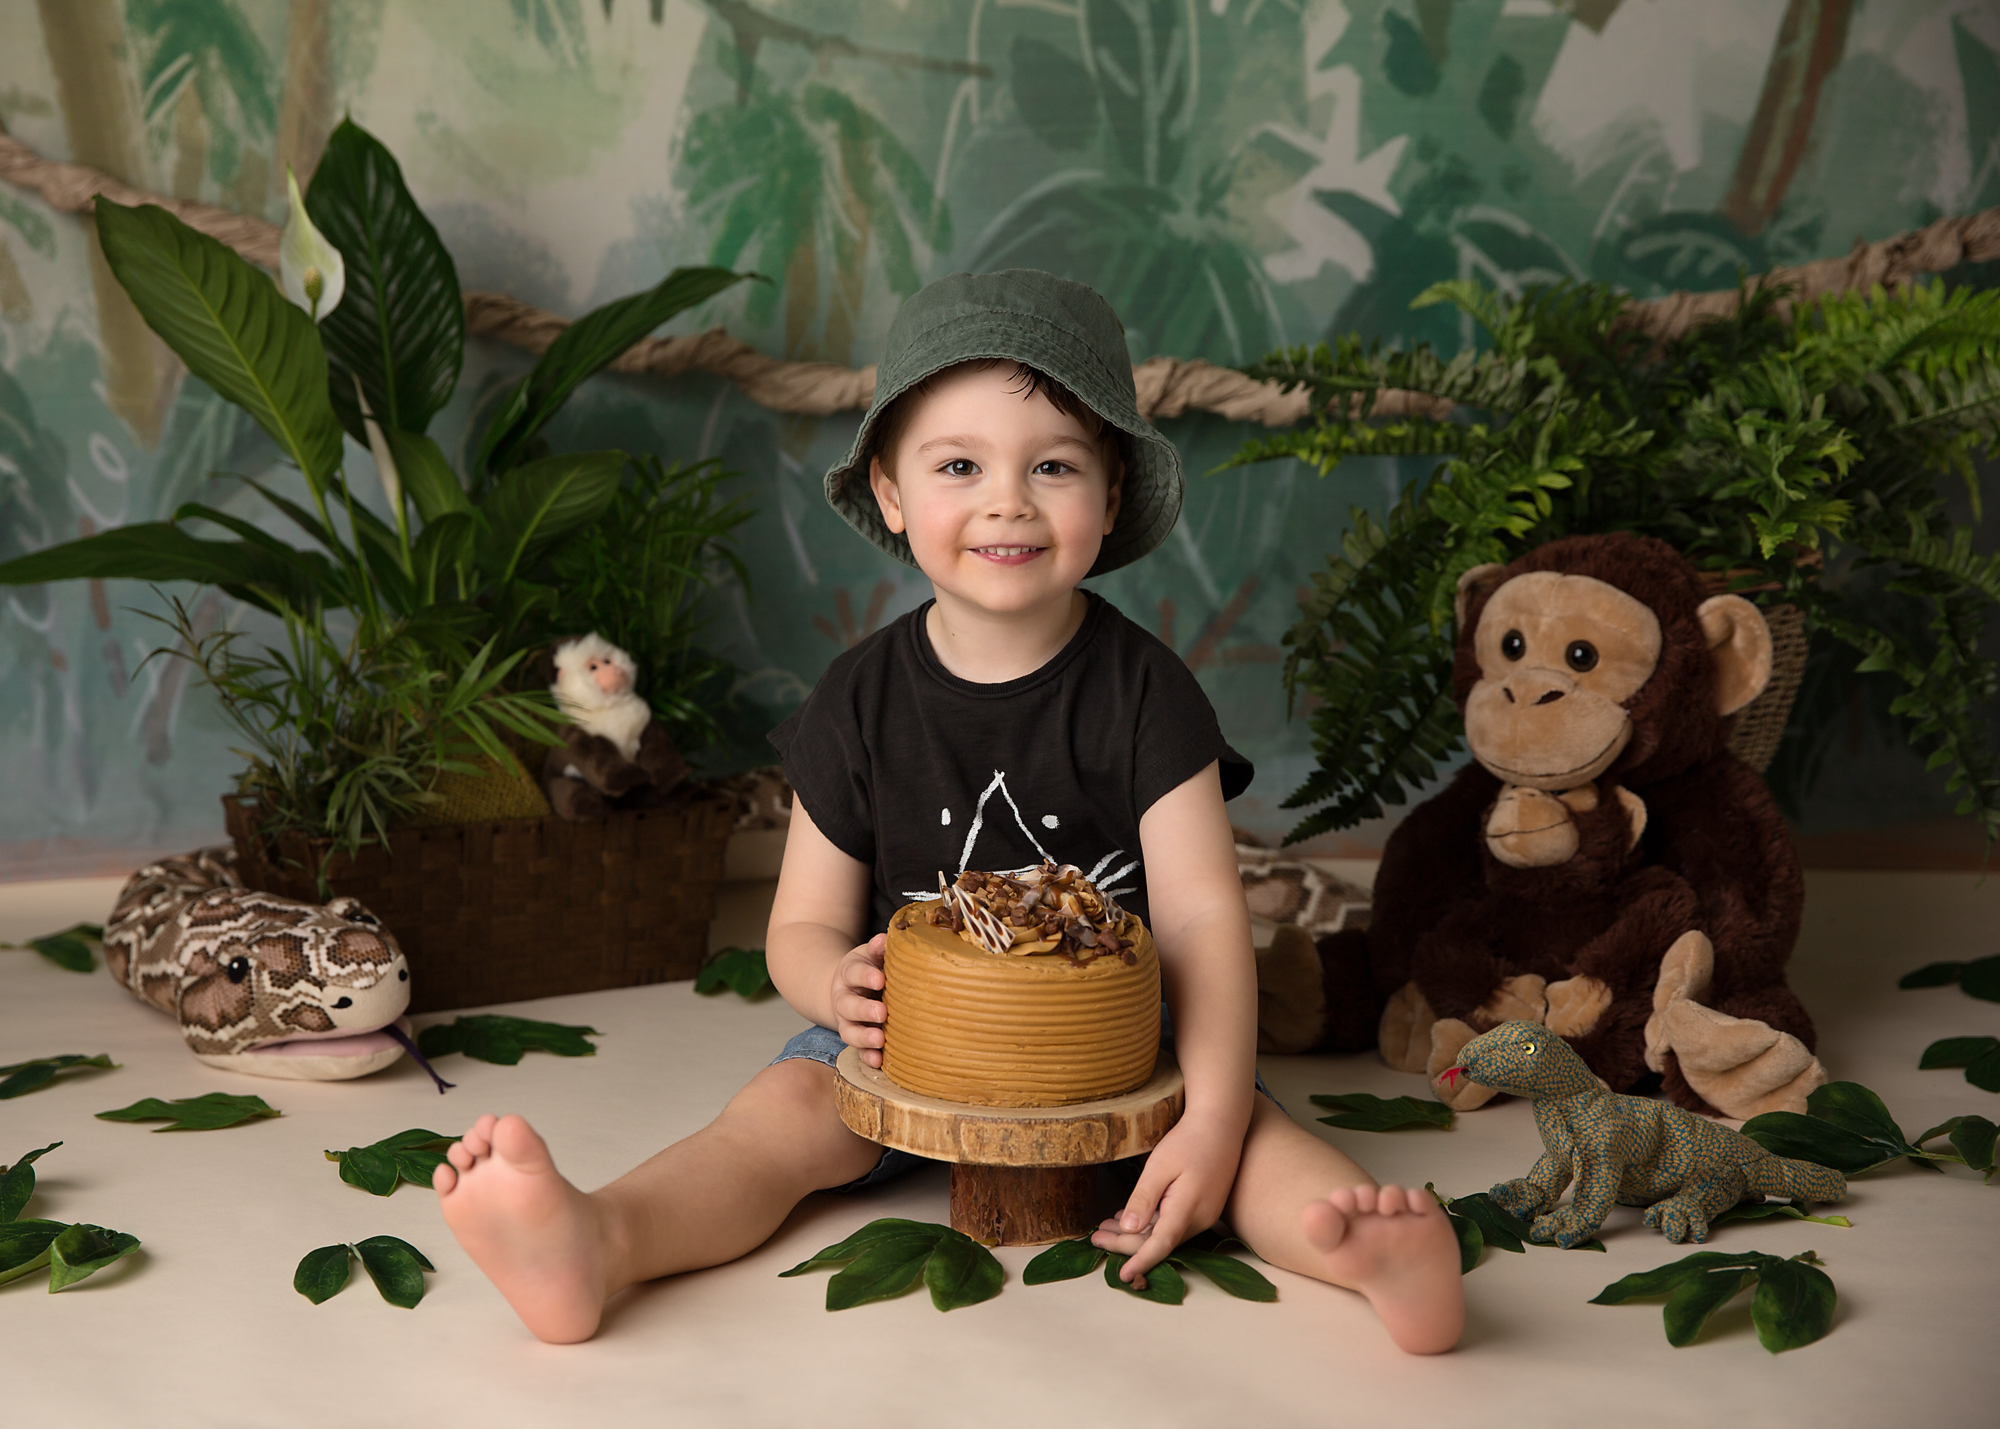 Jungle and monkey themed cake smash in caerphilly, near Cardiff, South Wales